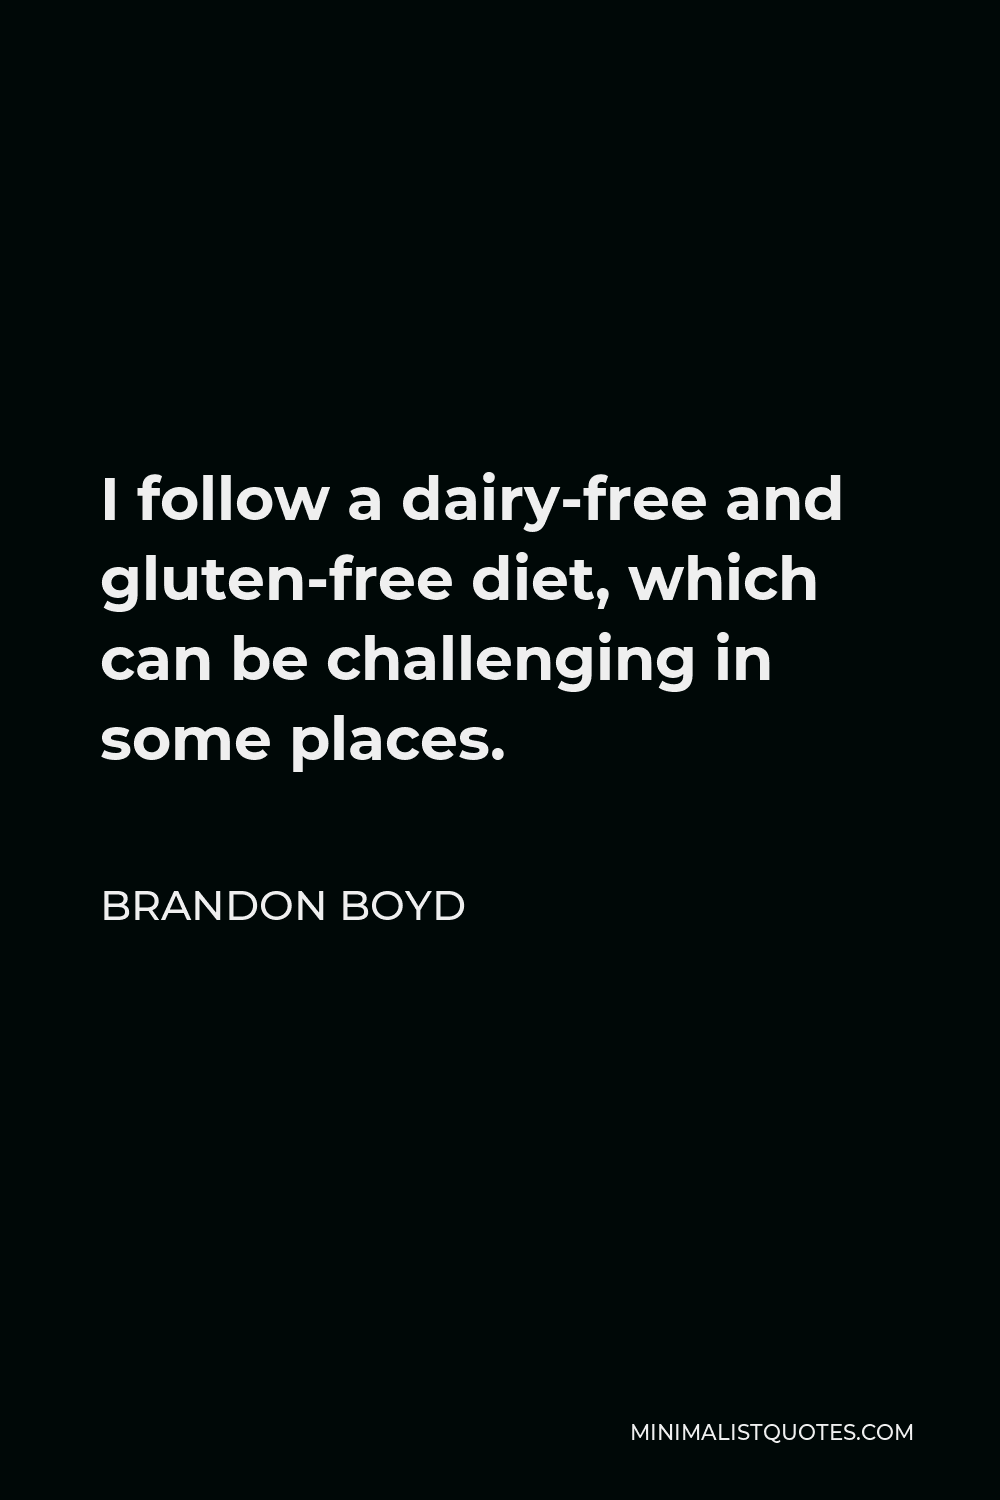 Brandon Boyd Quote - I follow a dairy-free and gluten-free diet, which can be challenging in some places.